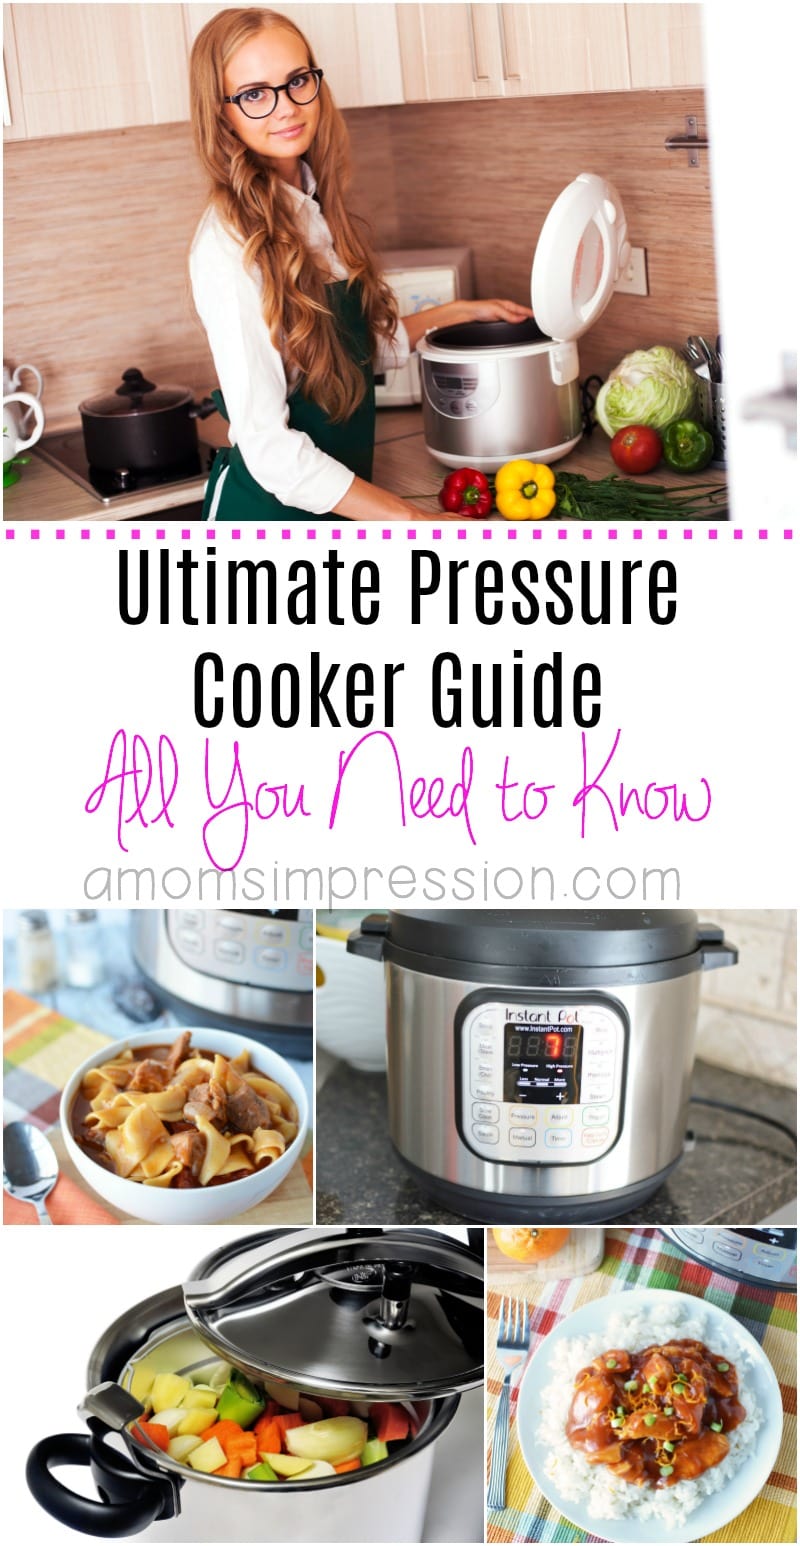 Have you been wanting to try a pressure cooker but didn't know where to start? This ultimate pressure cooker guide is for you! Learn about the different types, how to clean them, why they are amazing and some great recipes to get you going. #InstantPot #InstantPotRecipes #PressureCooker